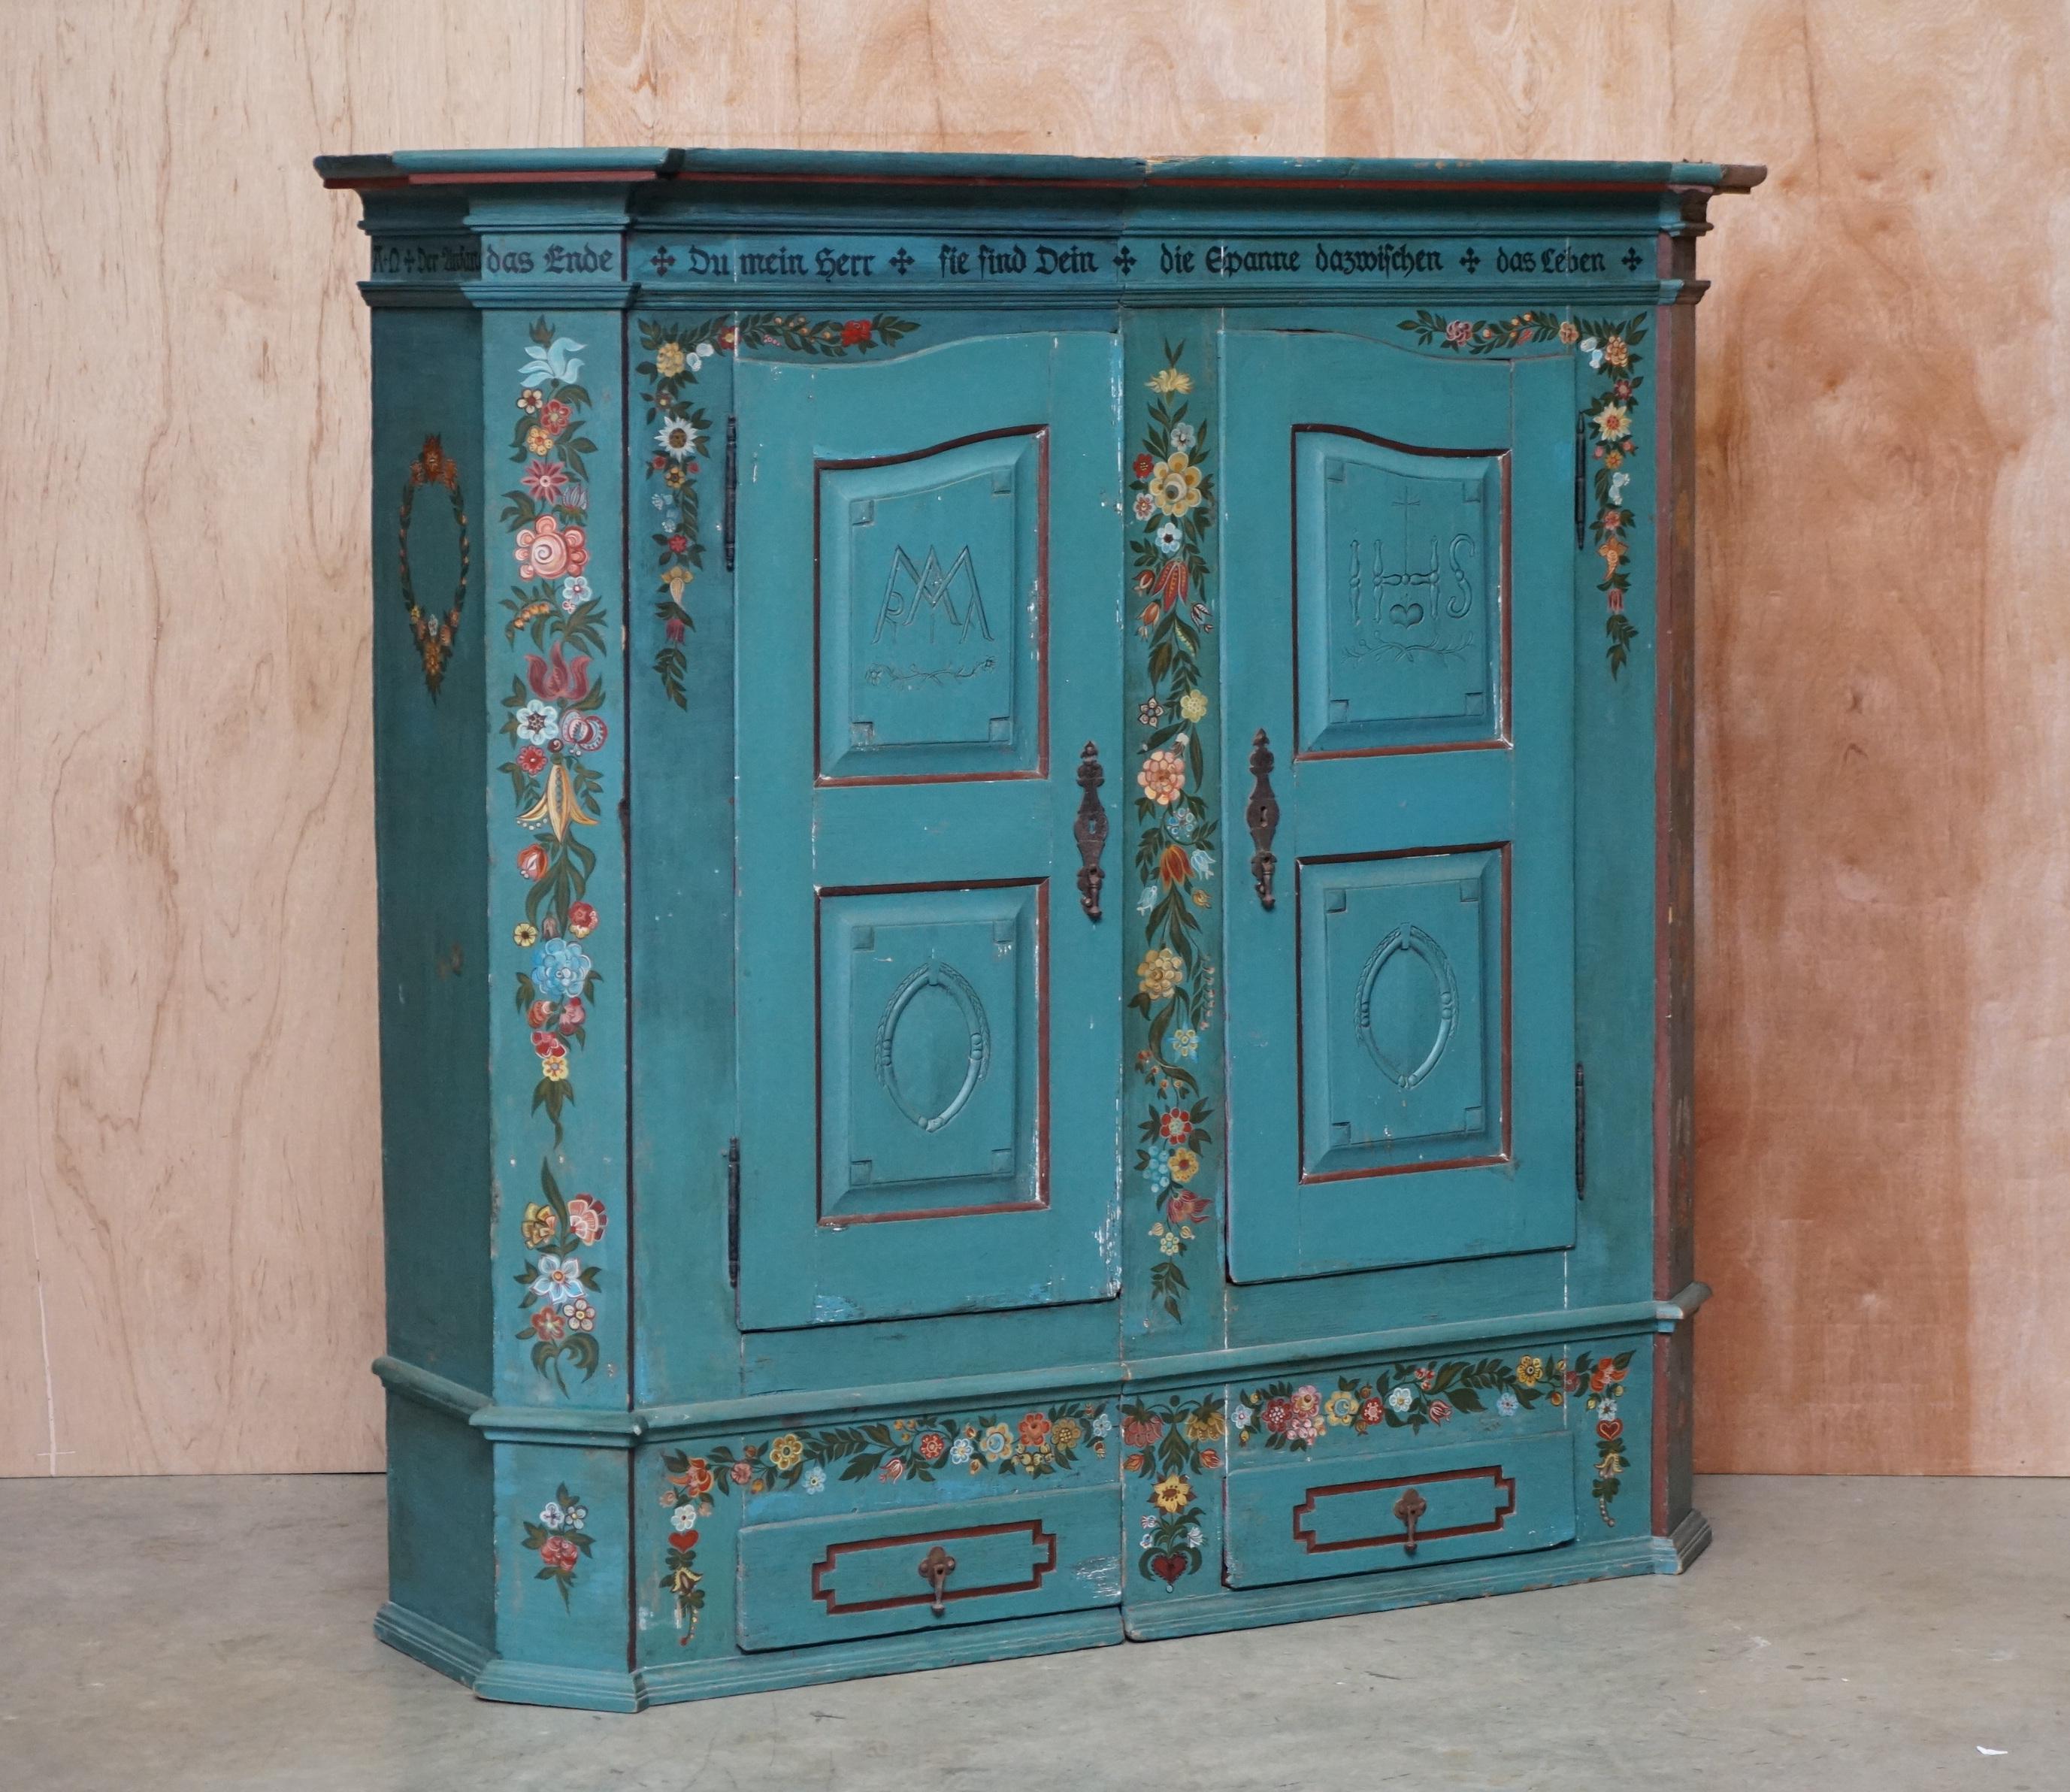 We are delighted to offer for sale this stunning hand painted 1795 dated wardrobe or marriage cupboard which splits into two pieces for ease of transport 

A very good looking and well made piece, its decorated in the traditional east European way